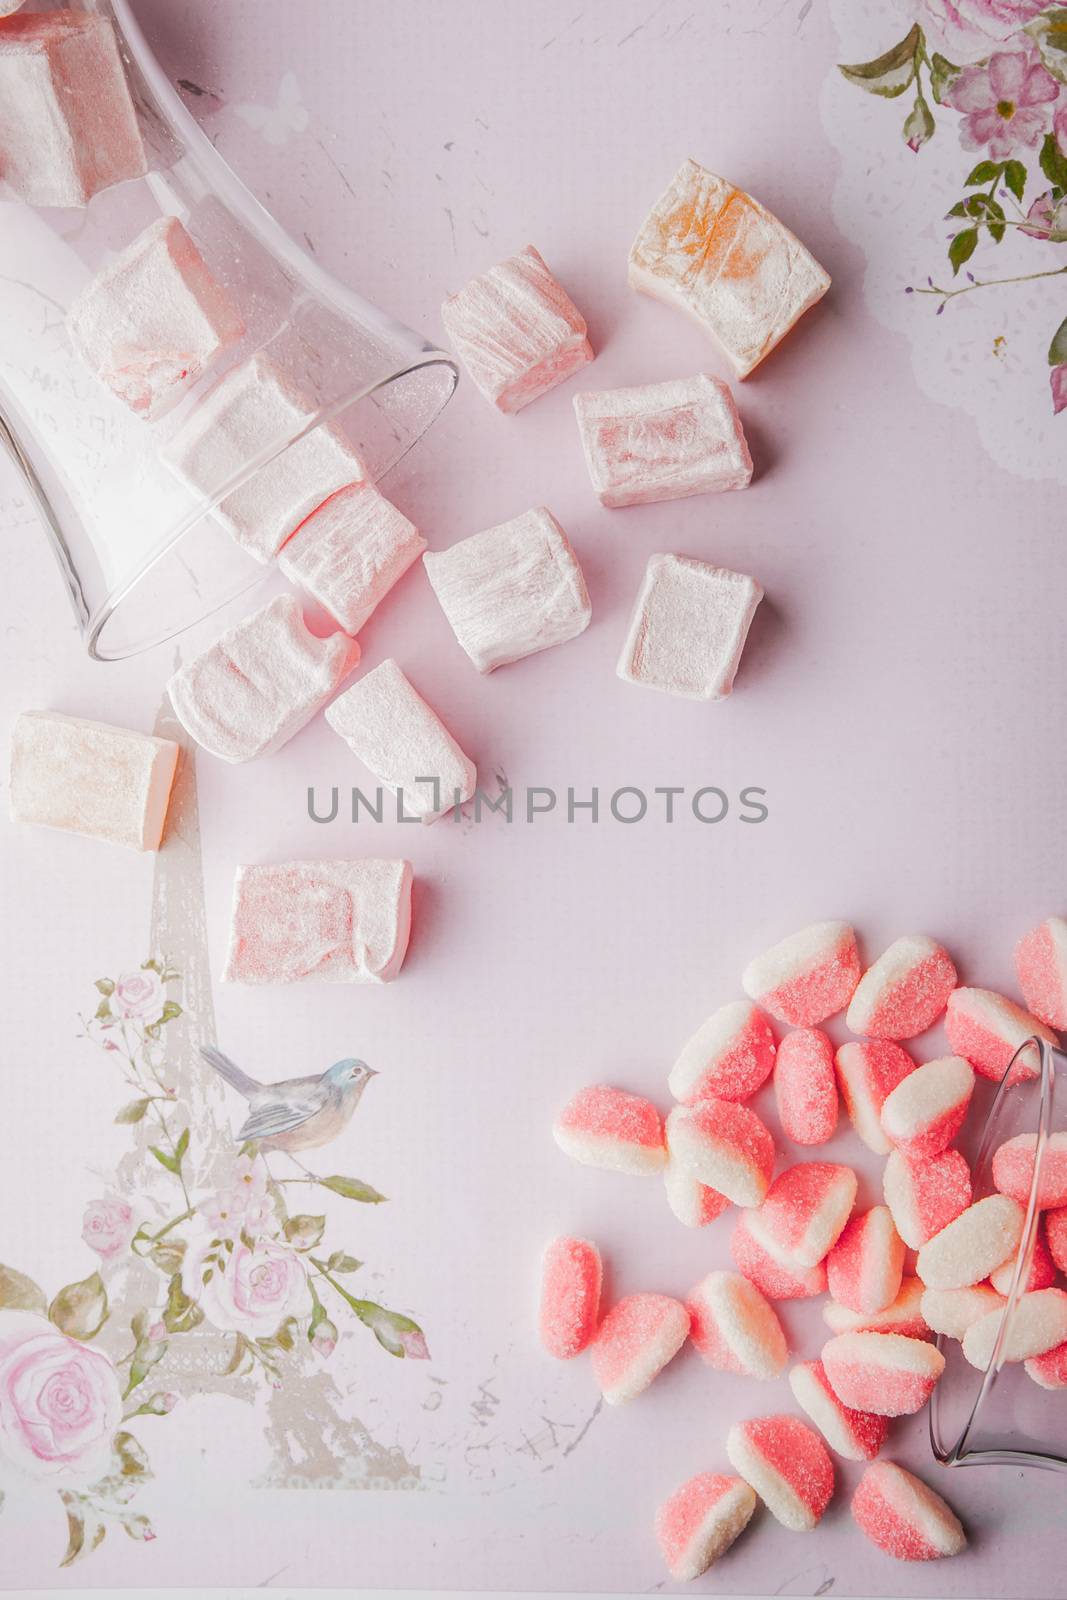 Turkish delight and fruit jellies on the romantic pink background